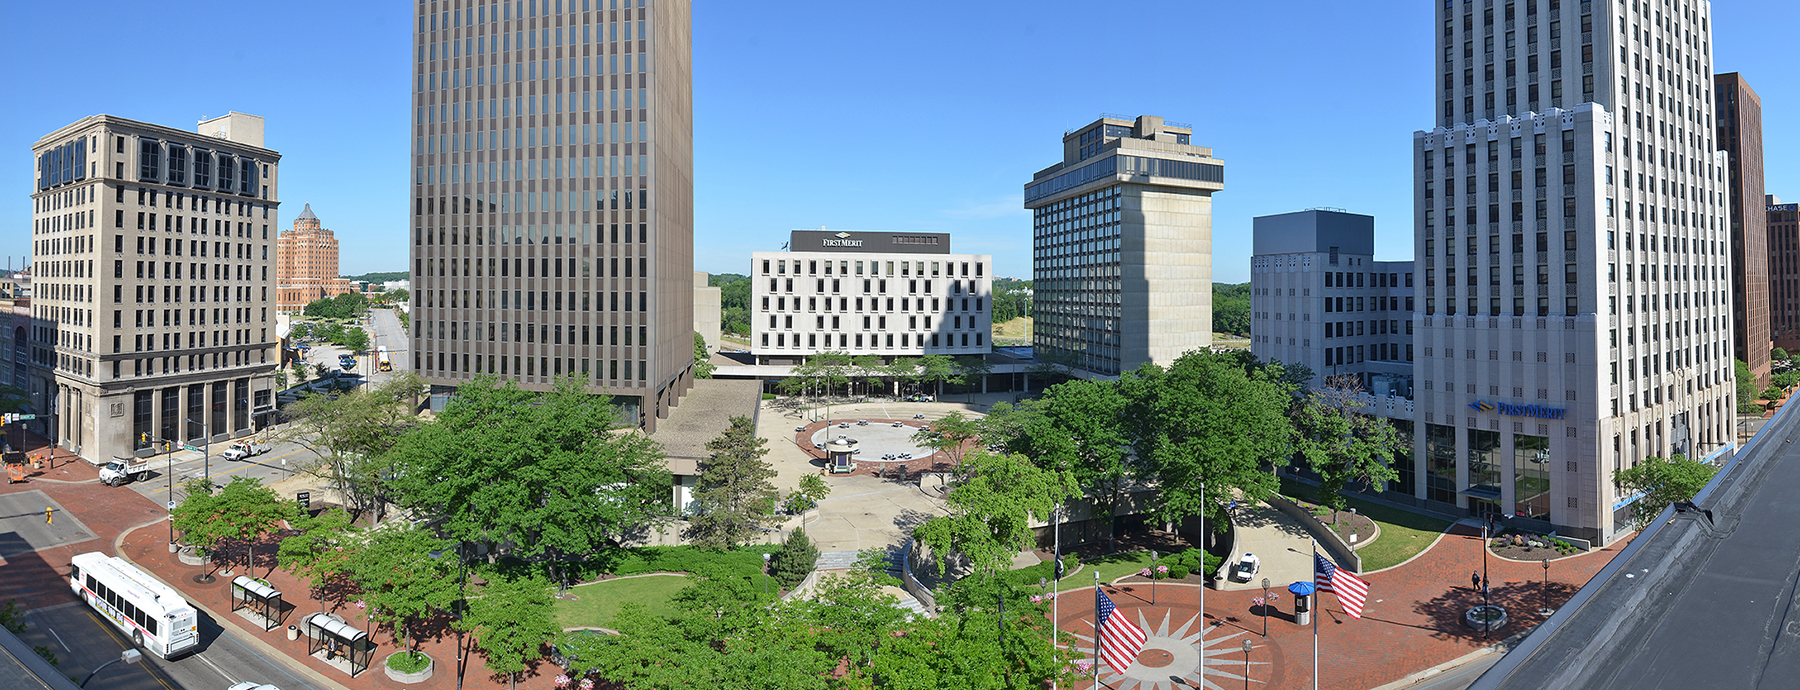 Images of Akron | 1800x690